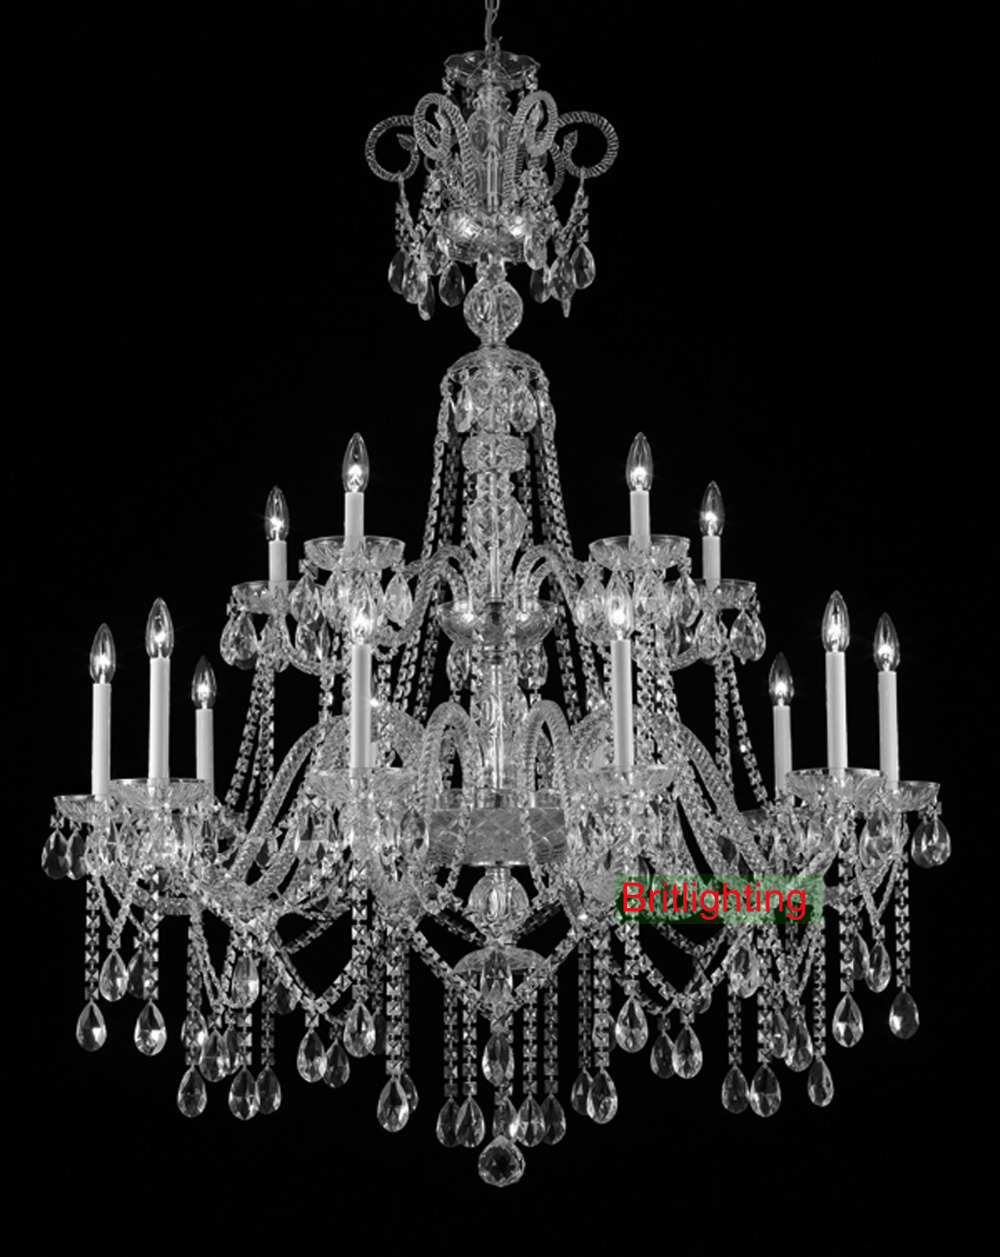 15 light candelabra chandelier with cyrstals traditional large empire crystal chandelier el chandeliers led home lighting - Click Image to Close